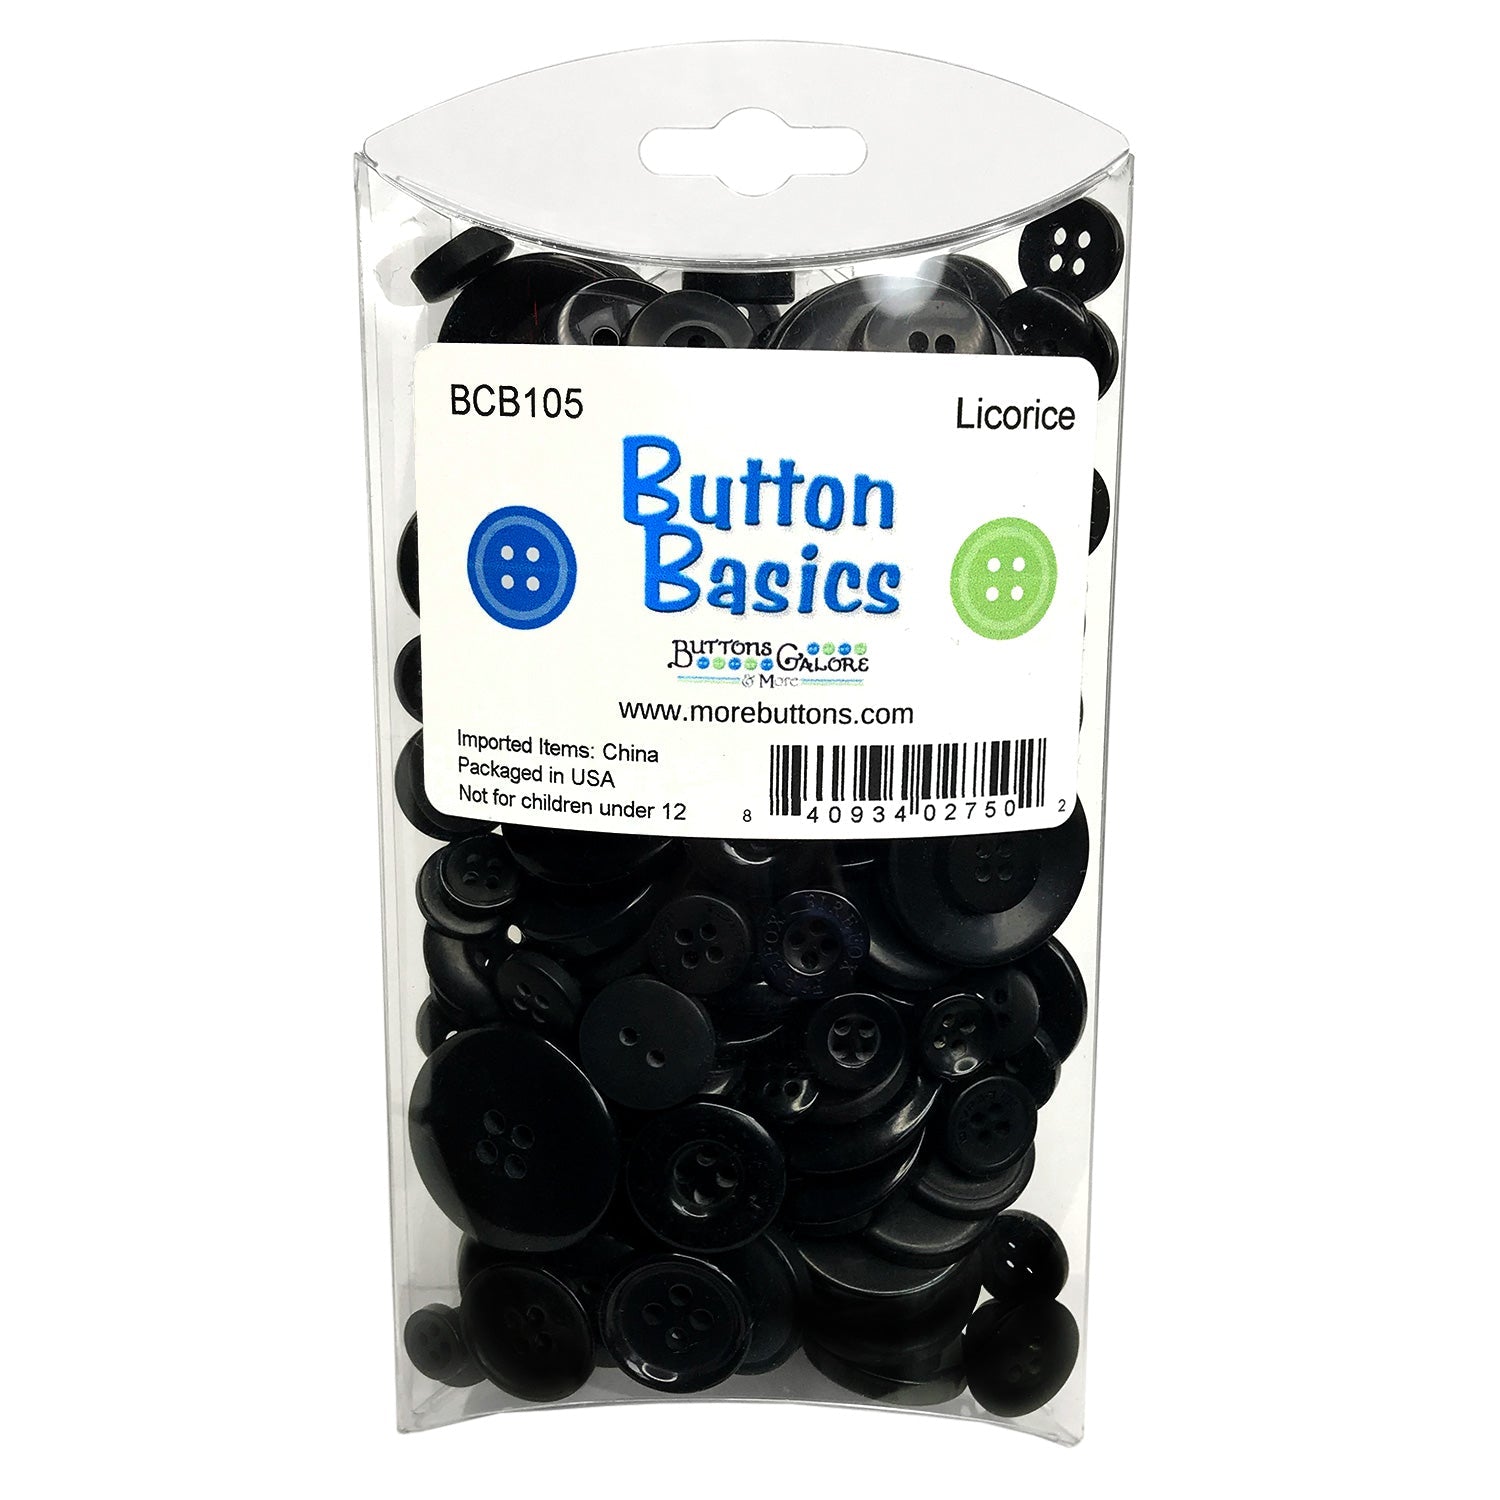 Mandala Crafts Medium Black Buttons for Crafts - Black Plastic Buttons for Sewing Buttons Replacement - 100 Resin Buttons Assorted 3/4 inch Round